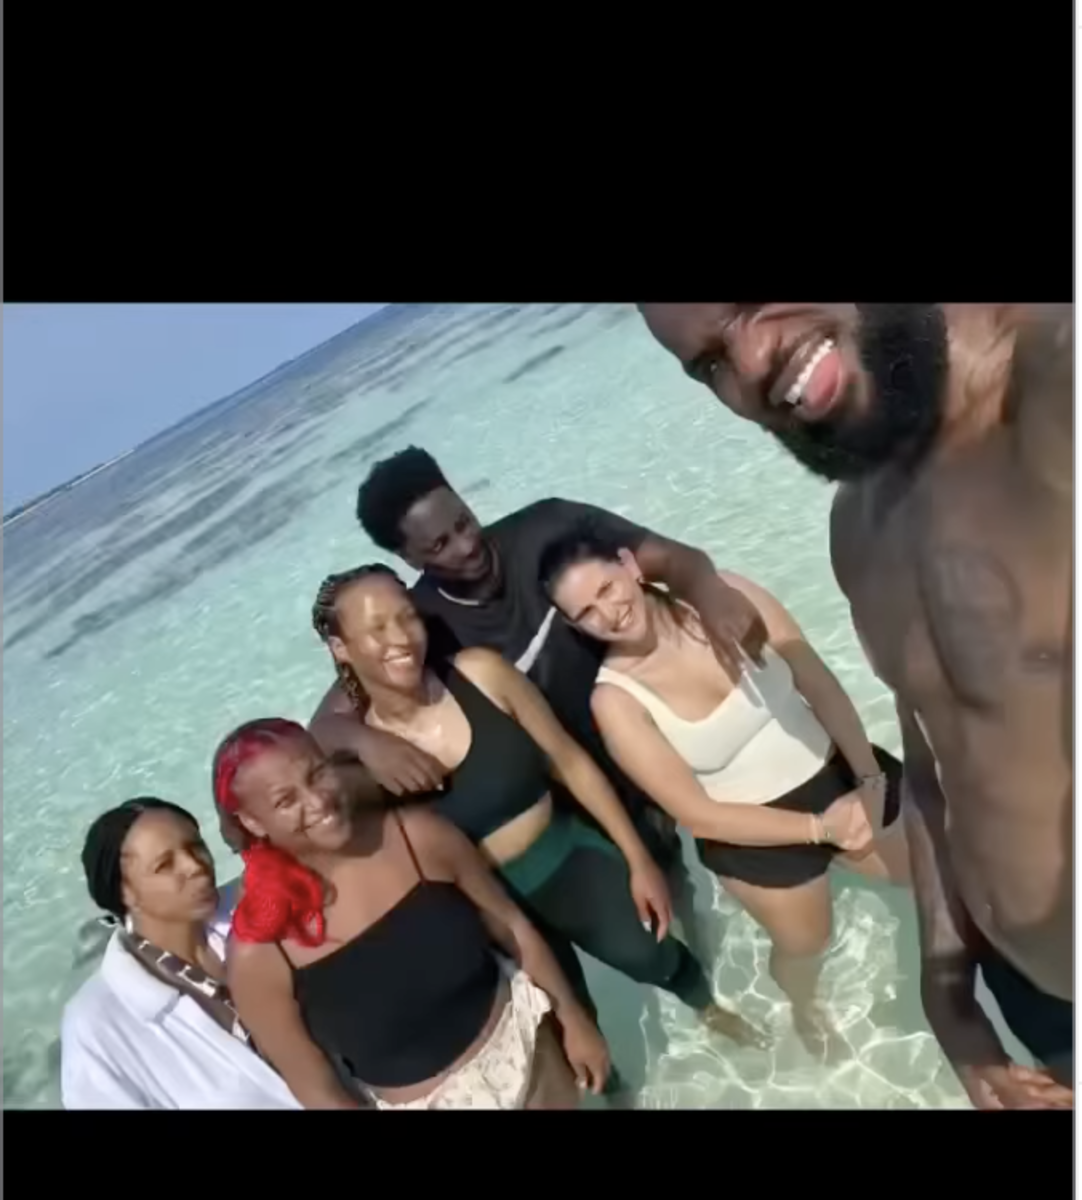 LeBron James Posts Stunning Video Of Epic Vacation In The Maldives: "Hey Life... I Simply Just Wanna Say, Thank You!"